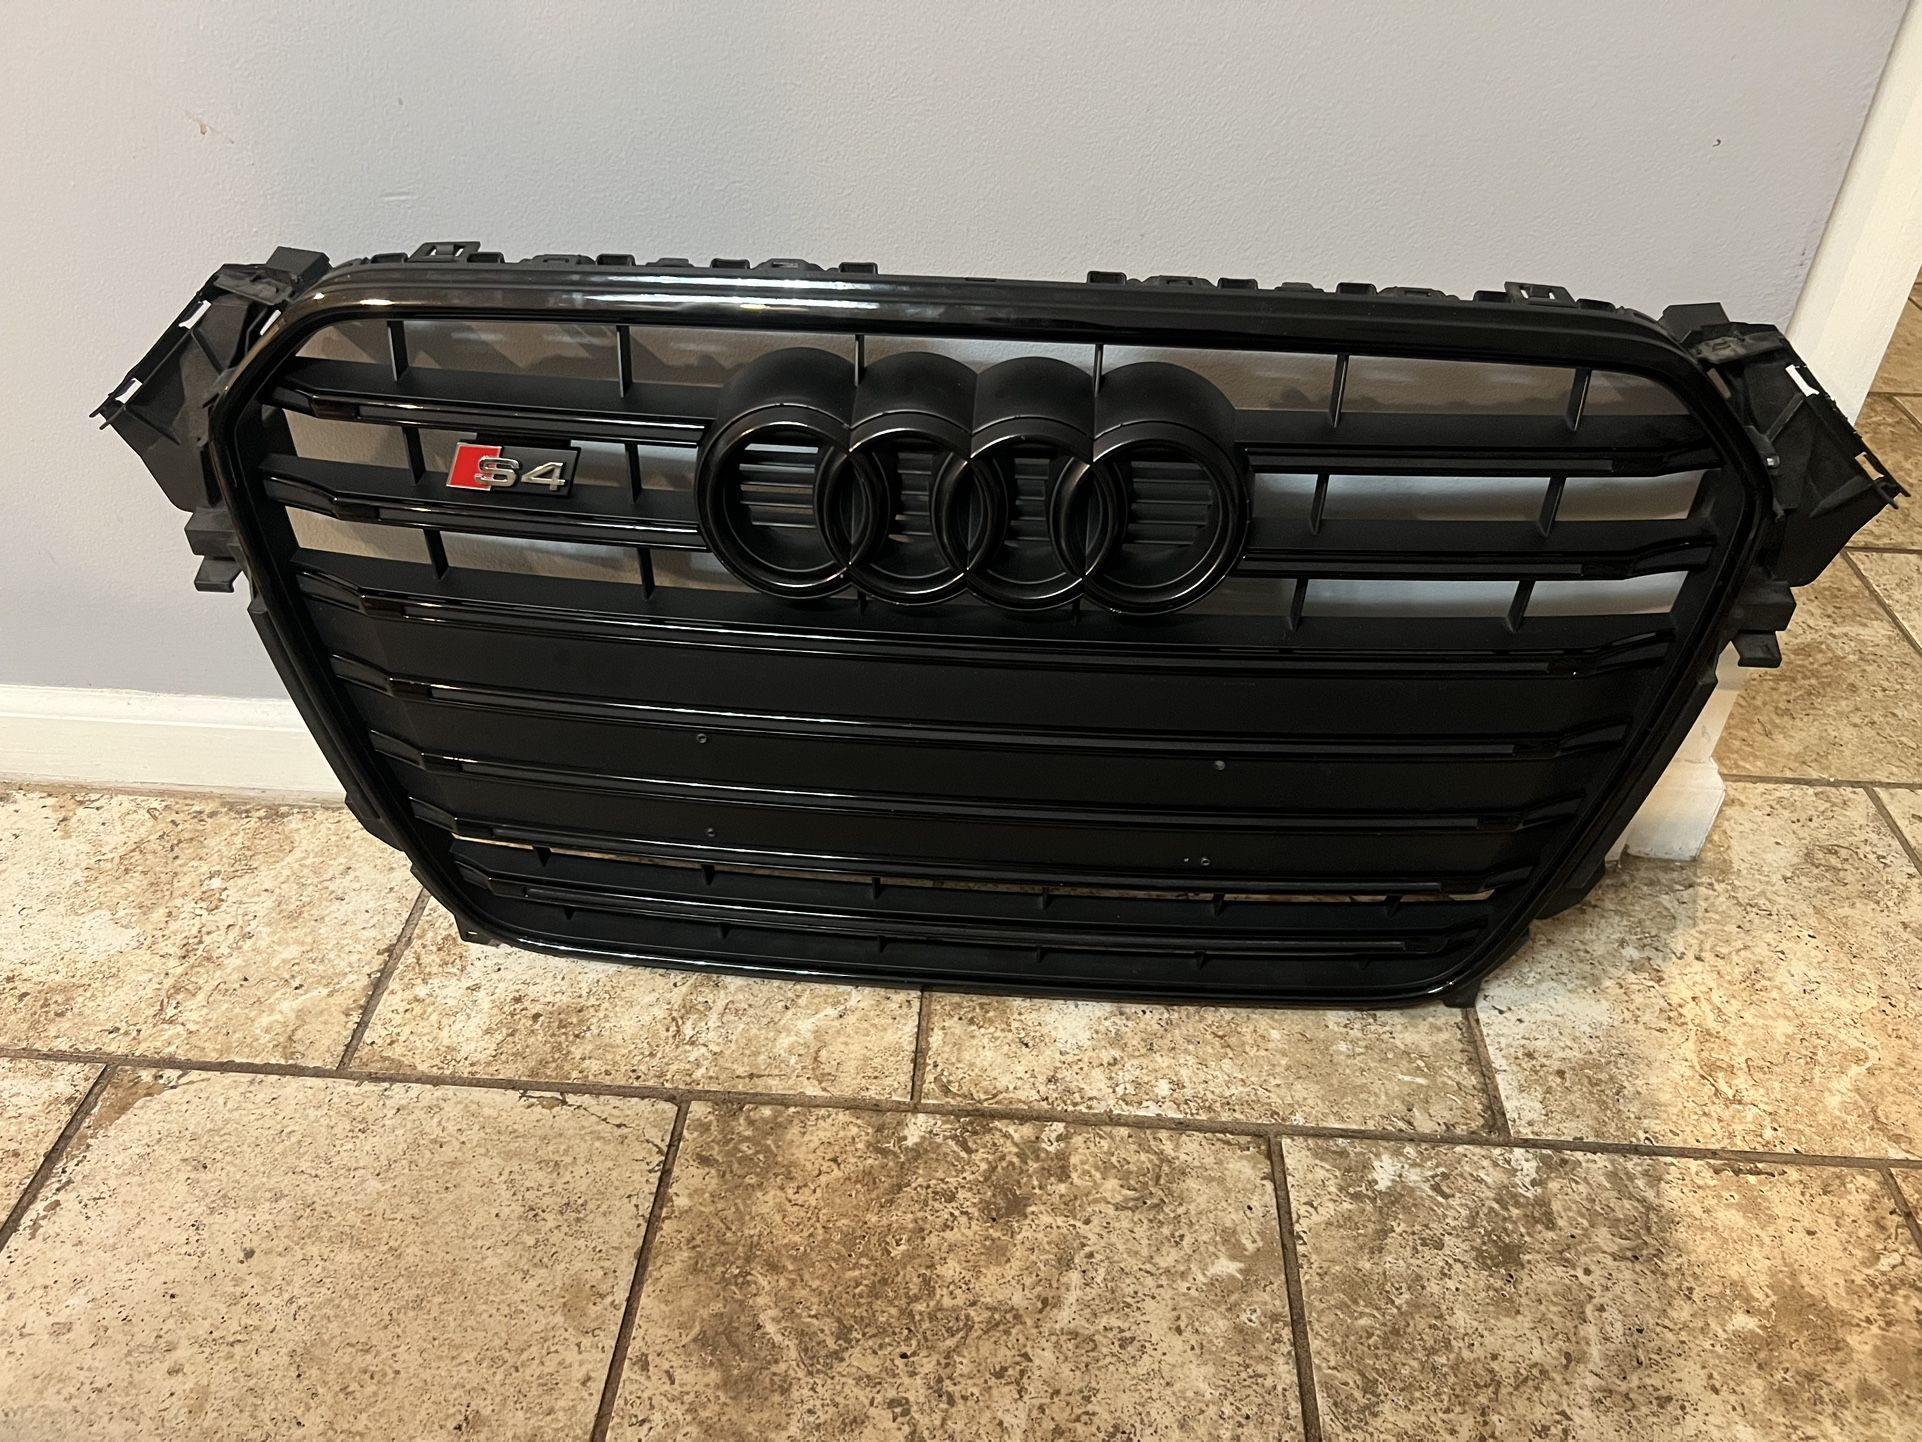 2013-2016 audi S4 oem front grill